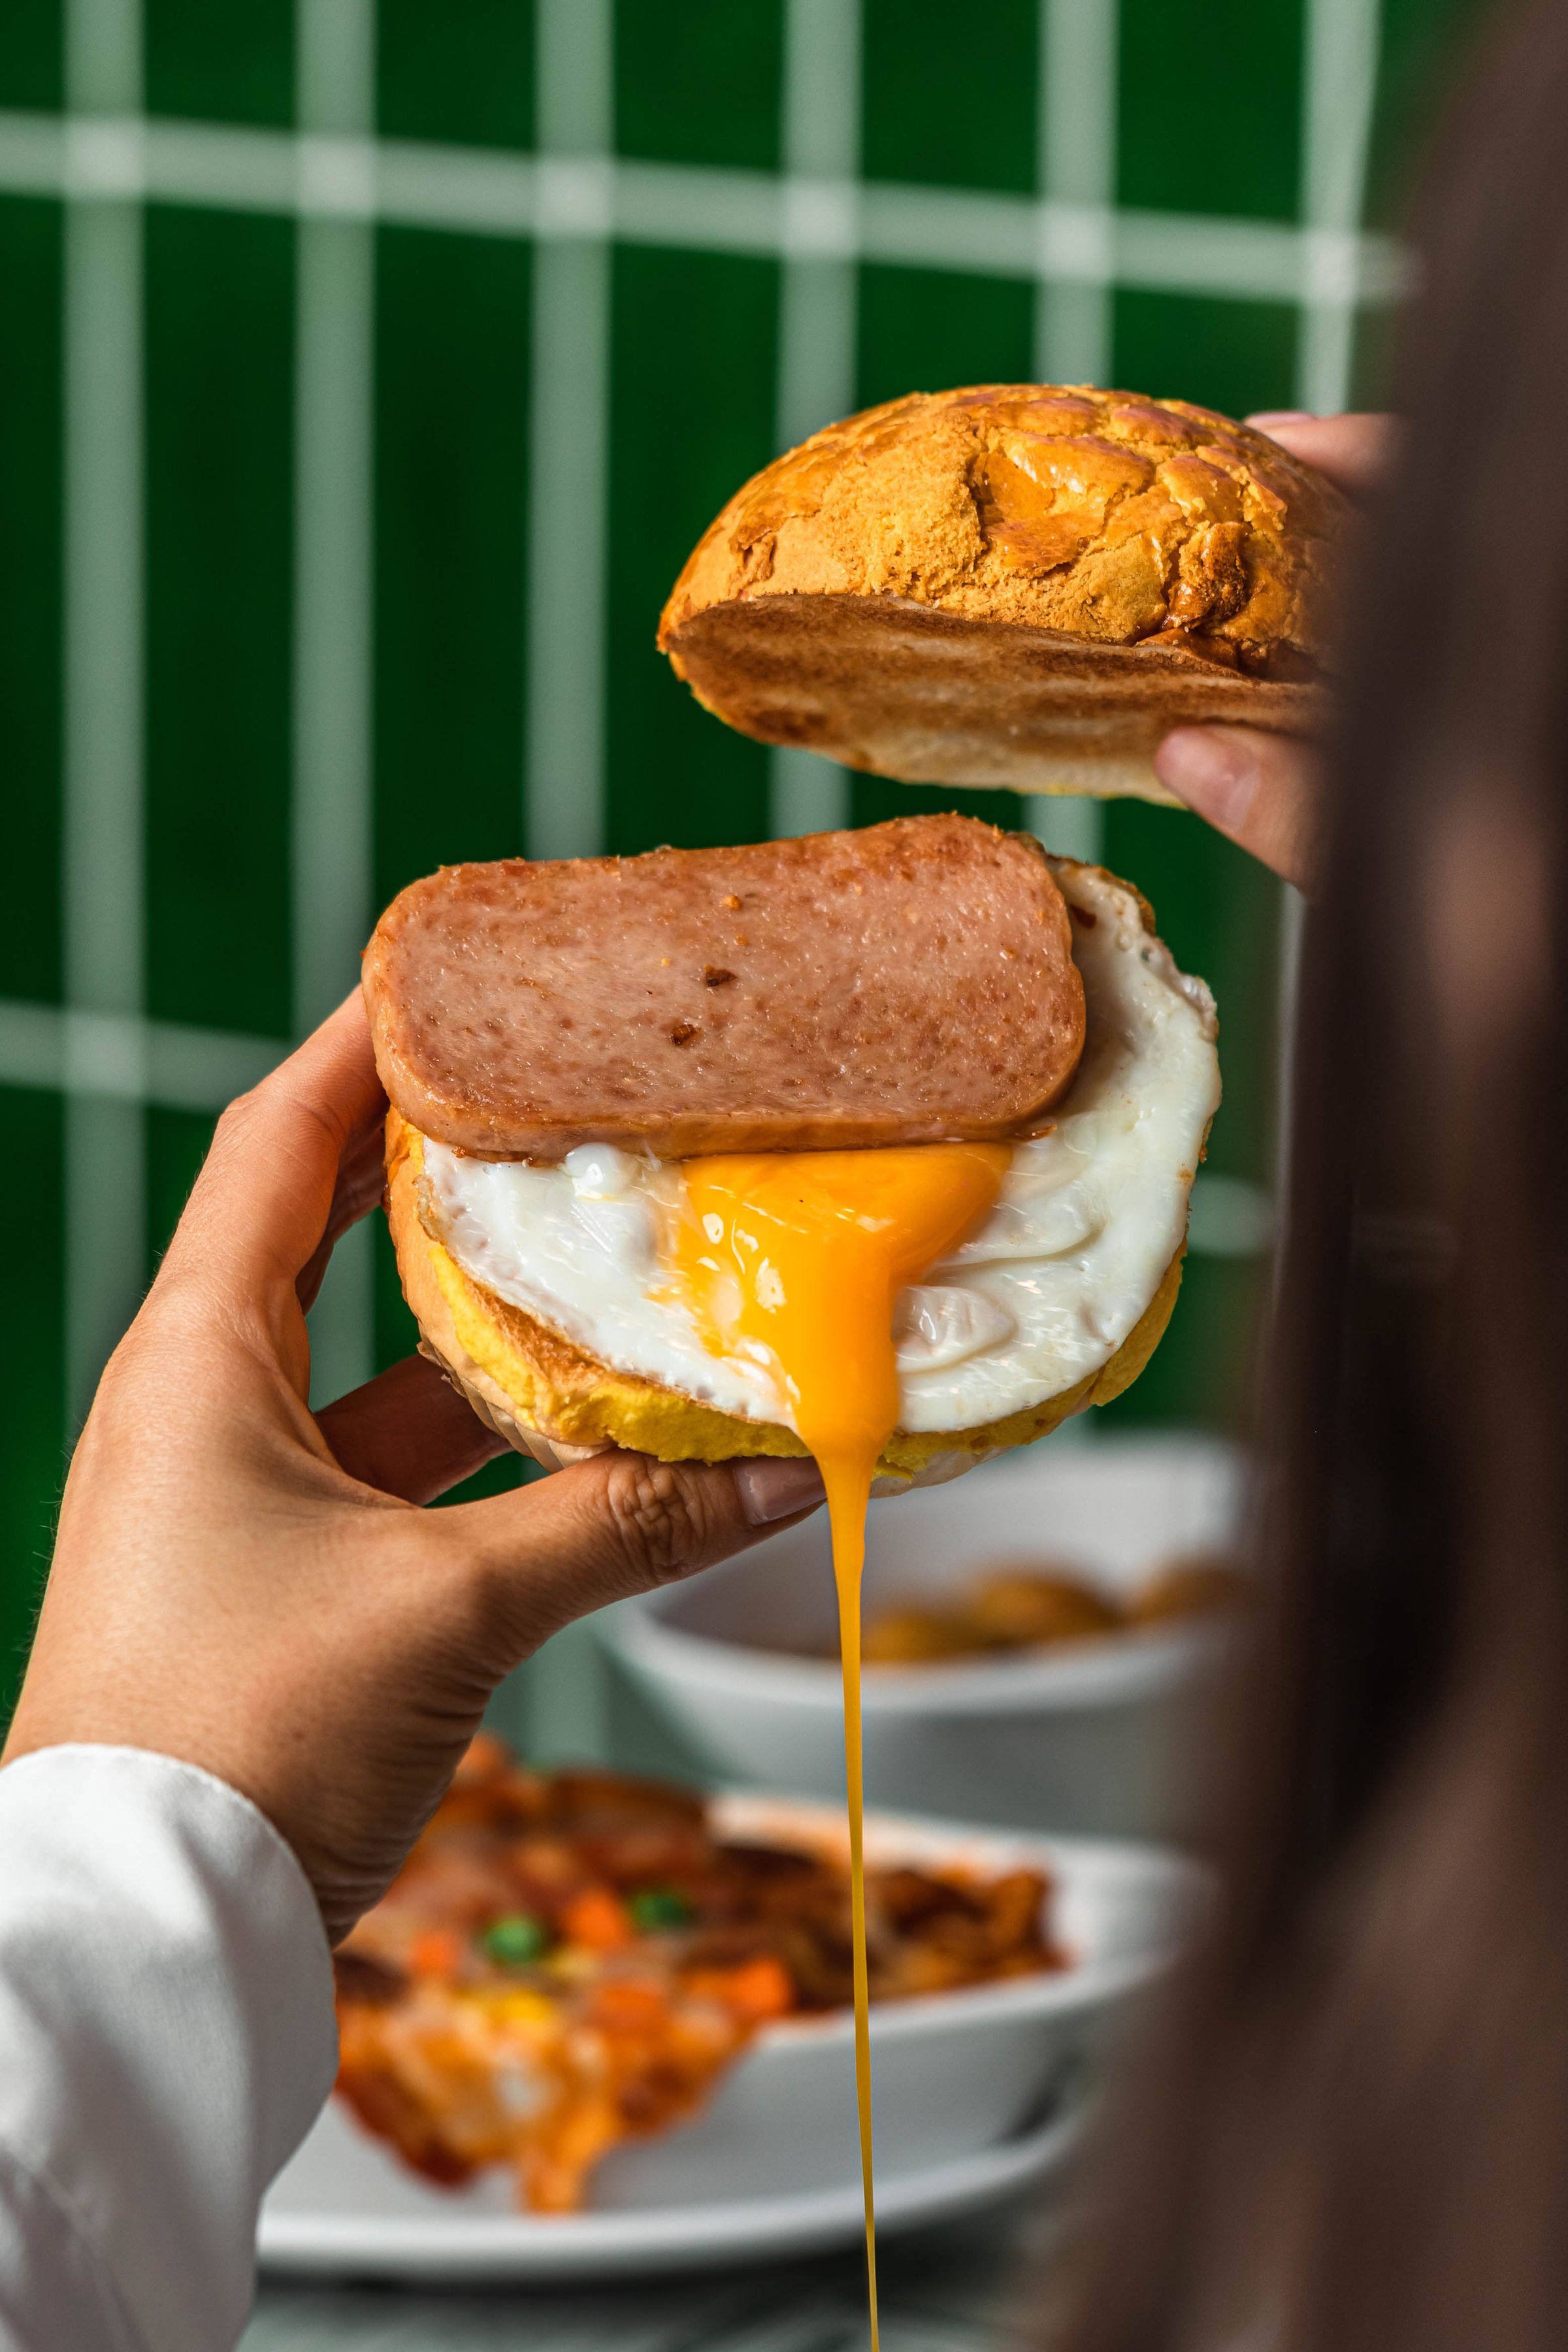 A Spam and egg pineapple bun at Sydney’s Kowloon Cafe. With their neon, familiar decor, even a replica minibus and tram, the Australian city’s Hong Kong-style tea cafes satisfy homesick migrants’ appetite for a dose of nostalgia. 